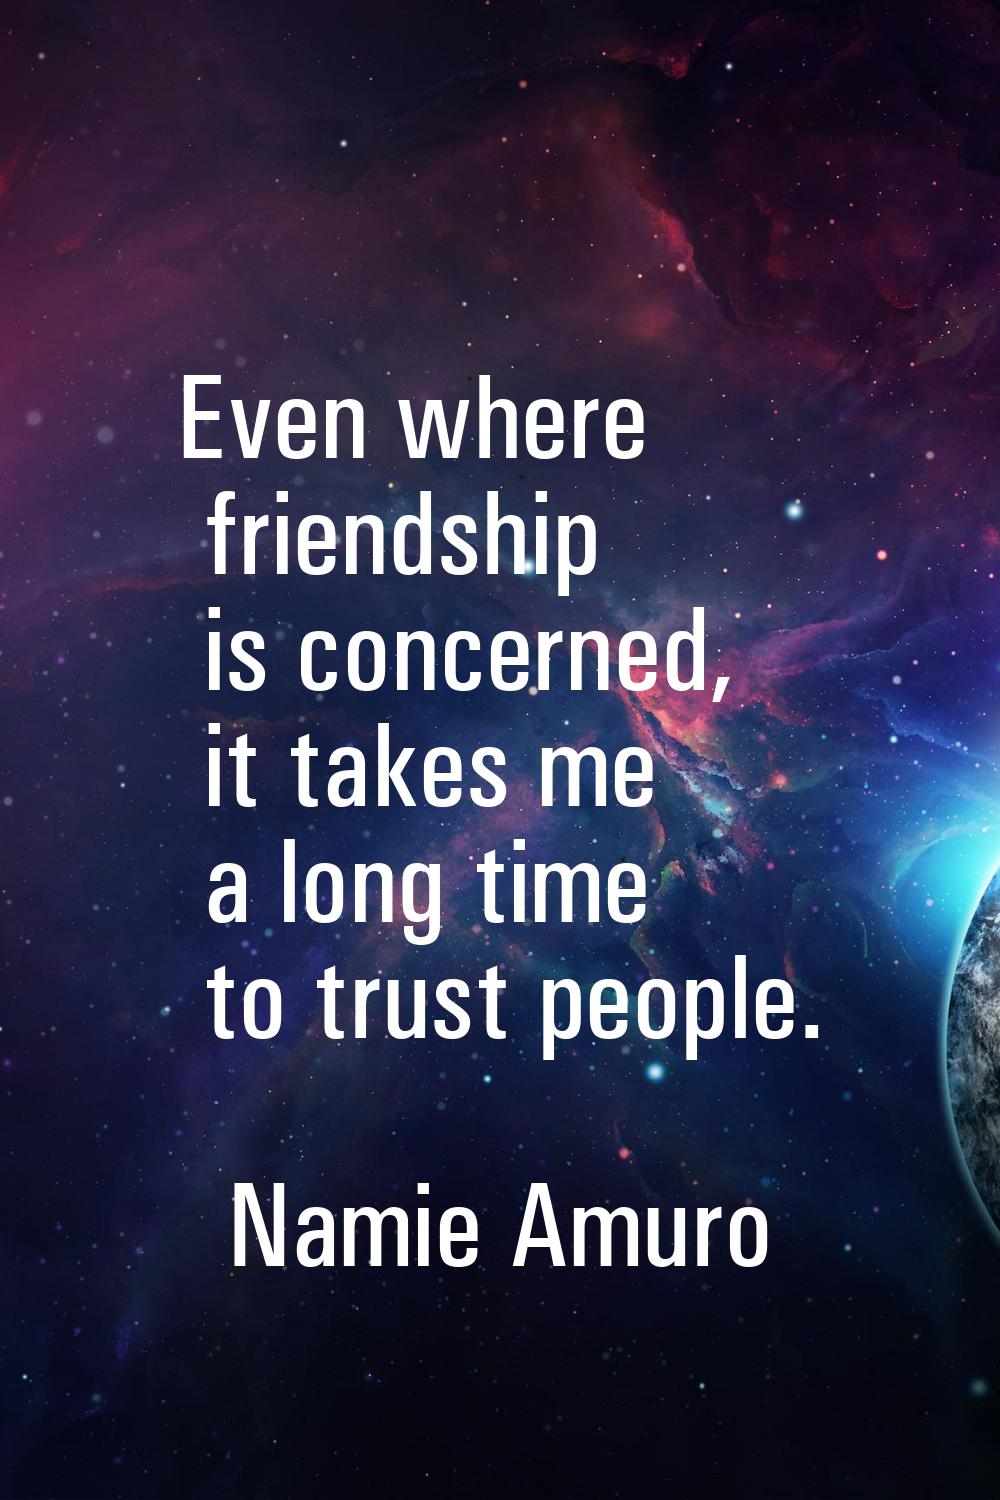 Even where friendship is concerned, it takes me a long time to trust people.